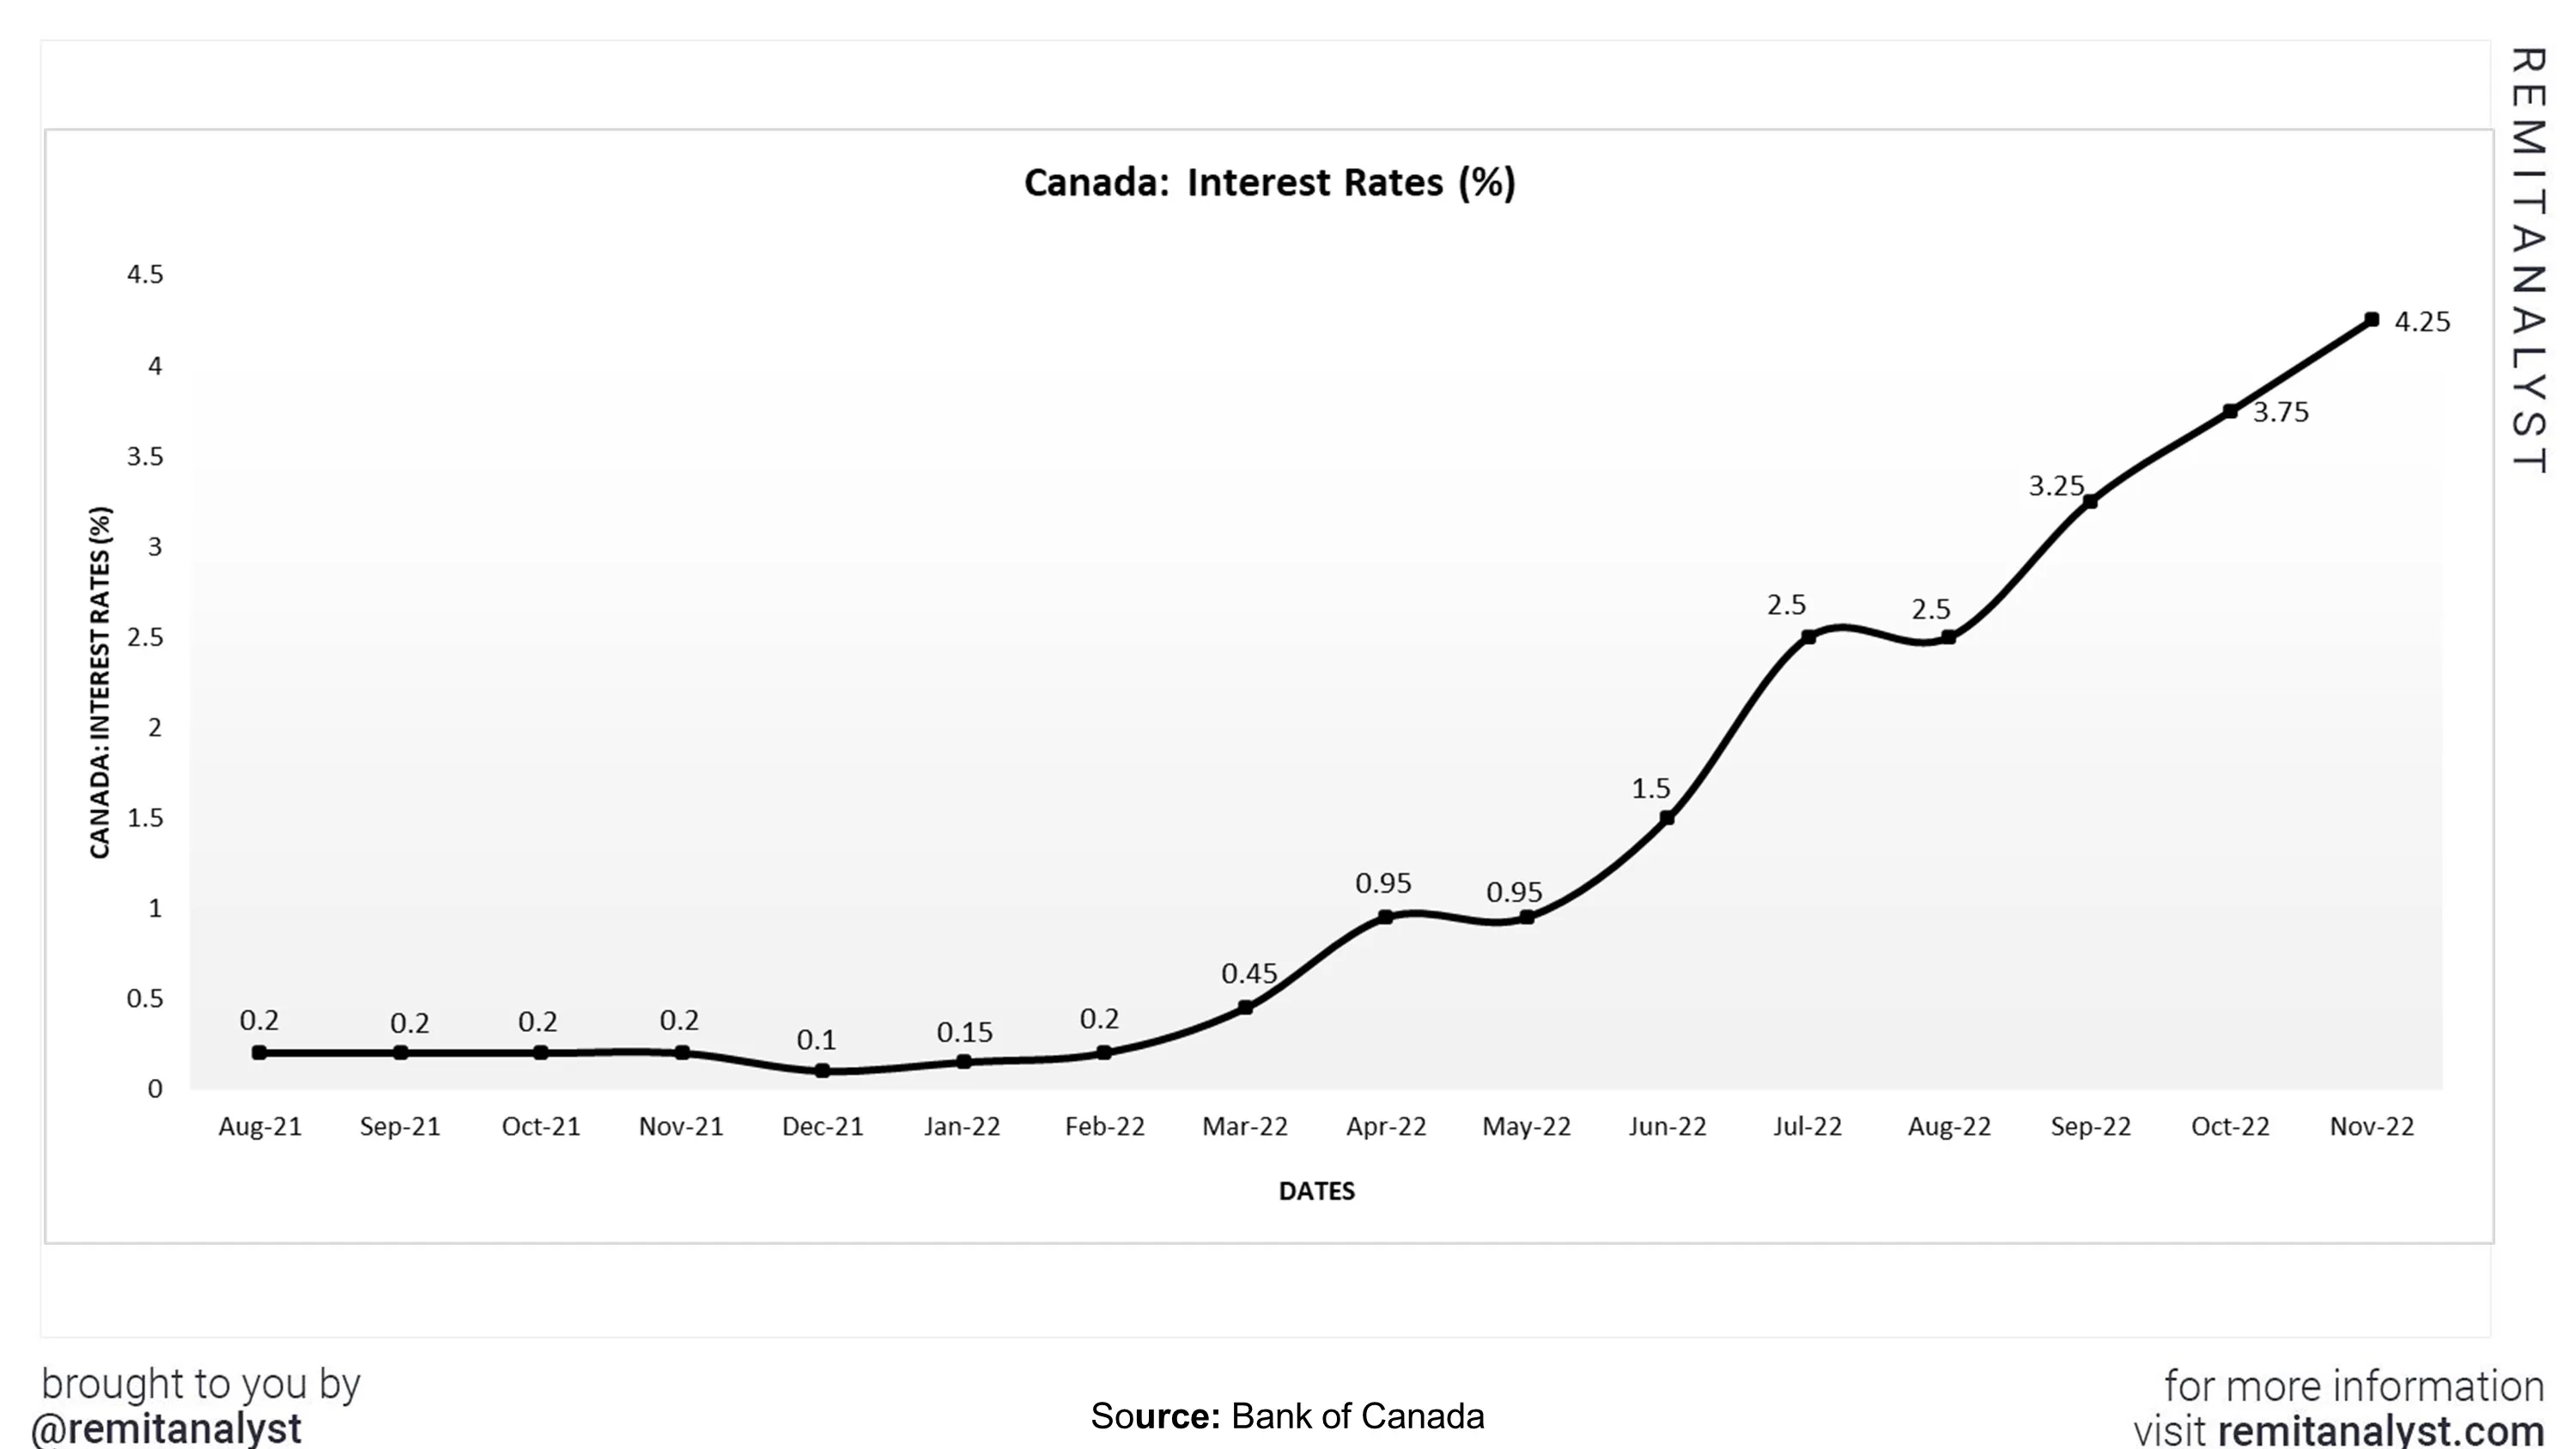 interest-rates-canada-from-aug-2021-to-nov-2022